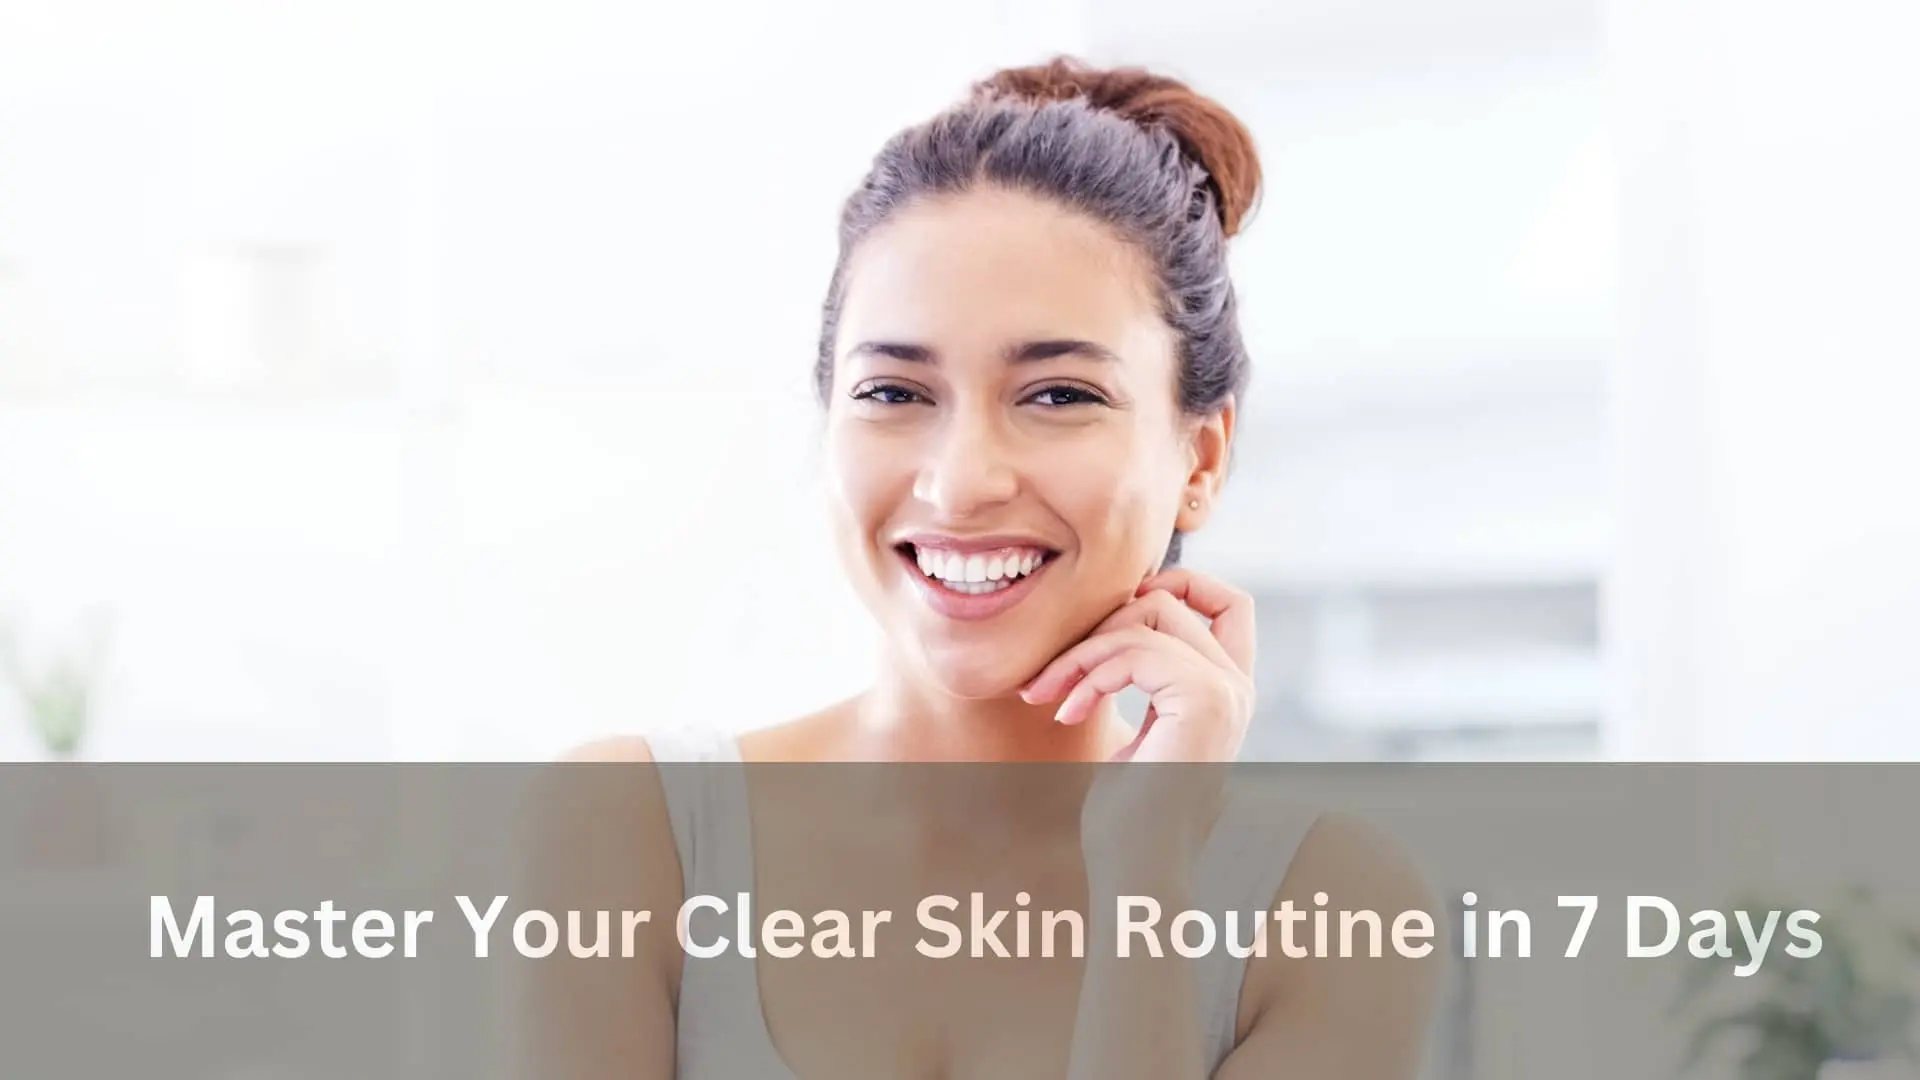 Master Your Clear Skin Routine in 7 Days